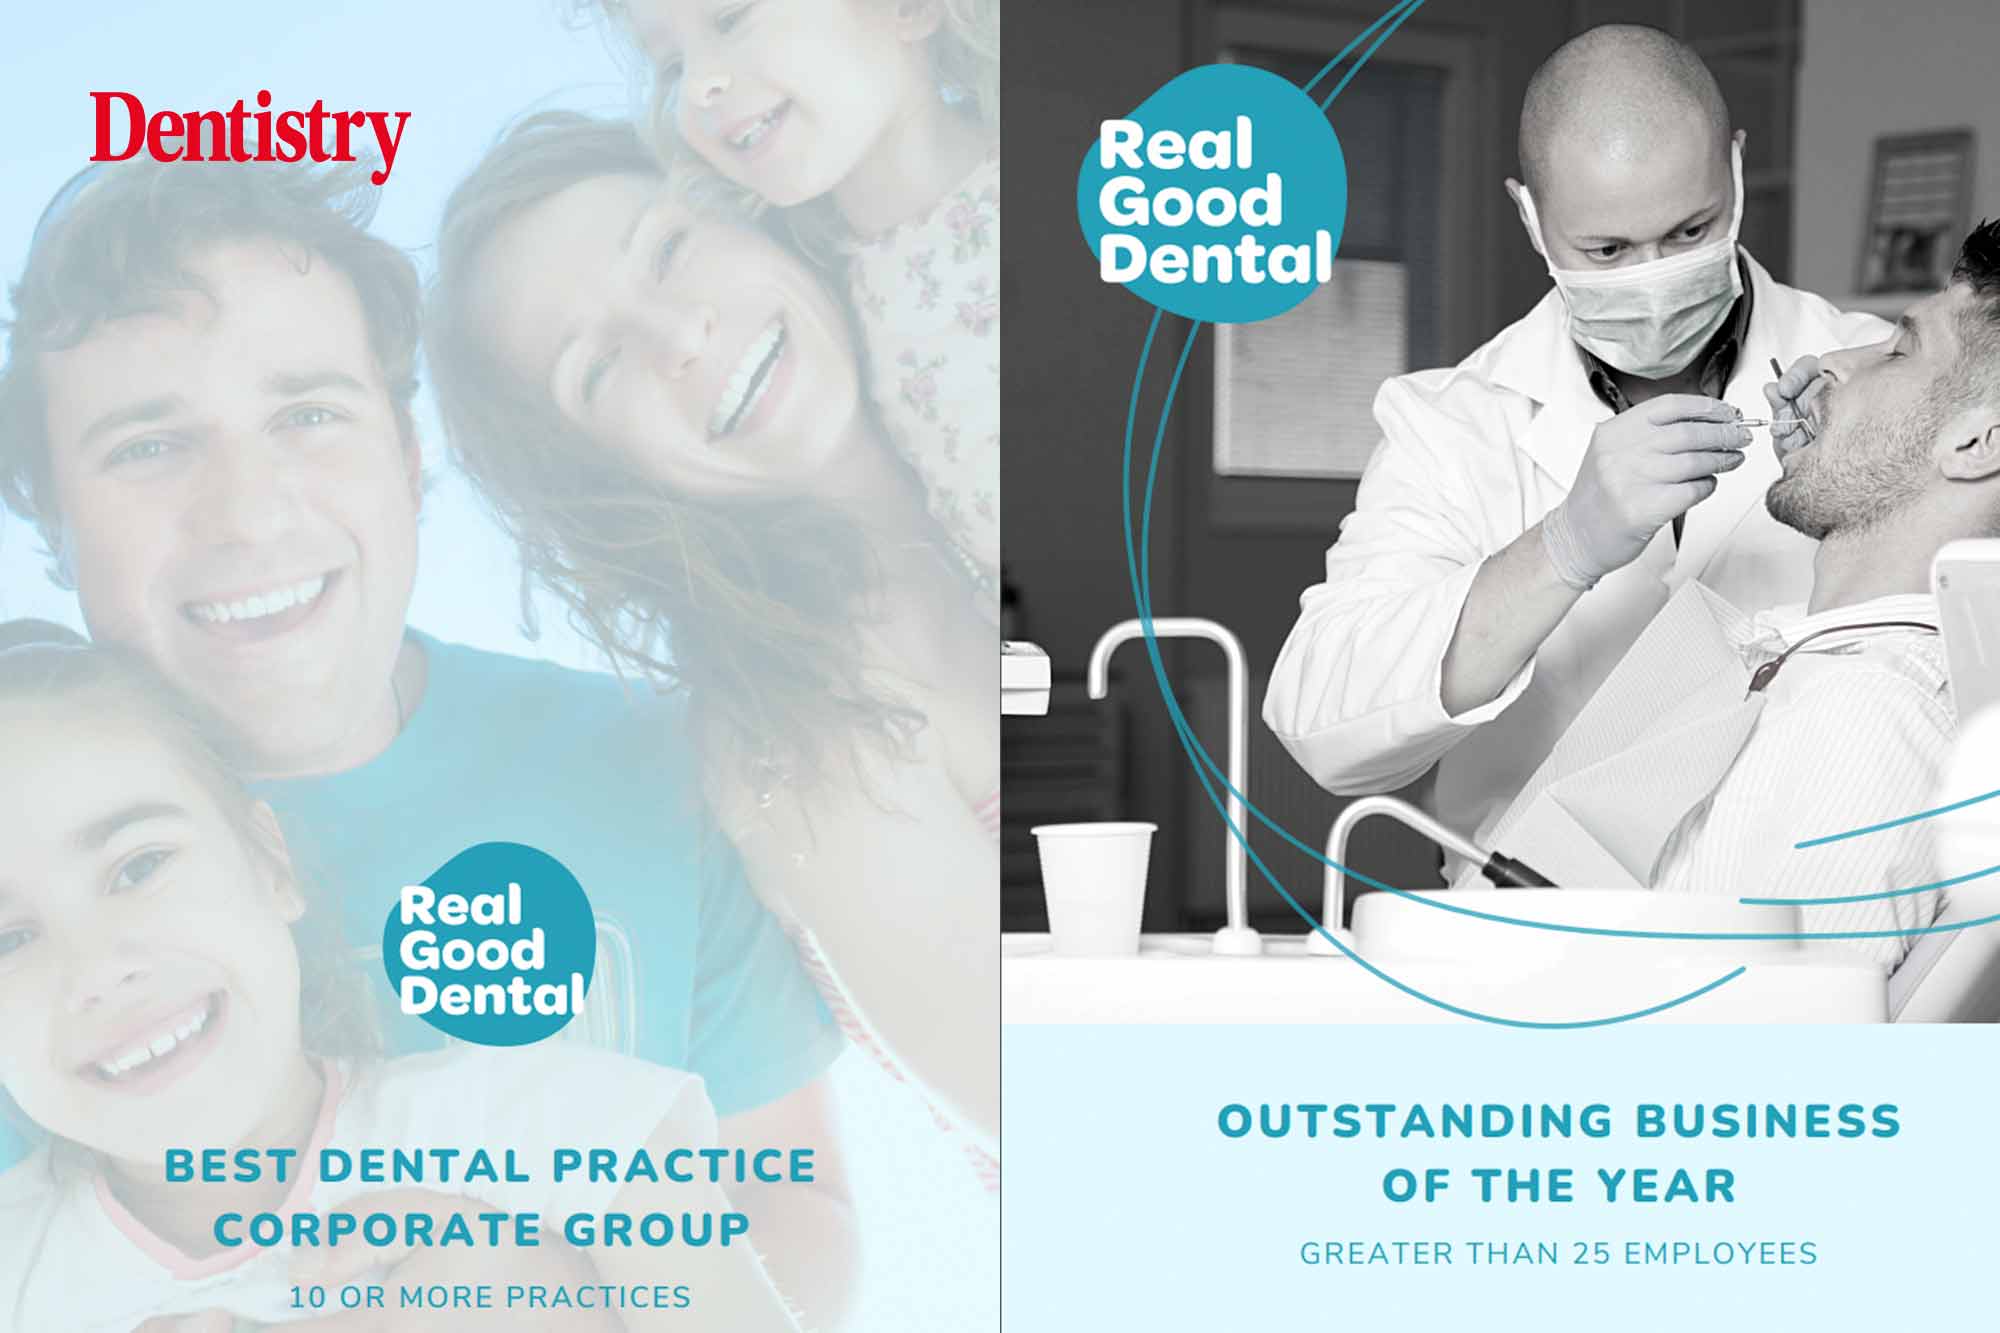 Real Good Dental celebrates shortlist successes with the Dental Industry Awards